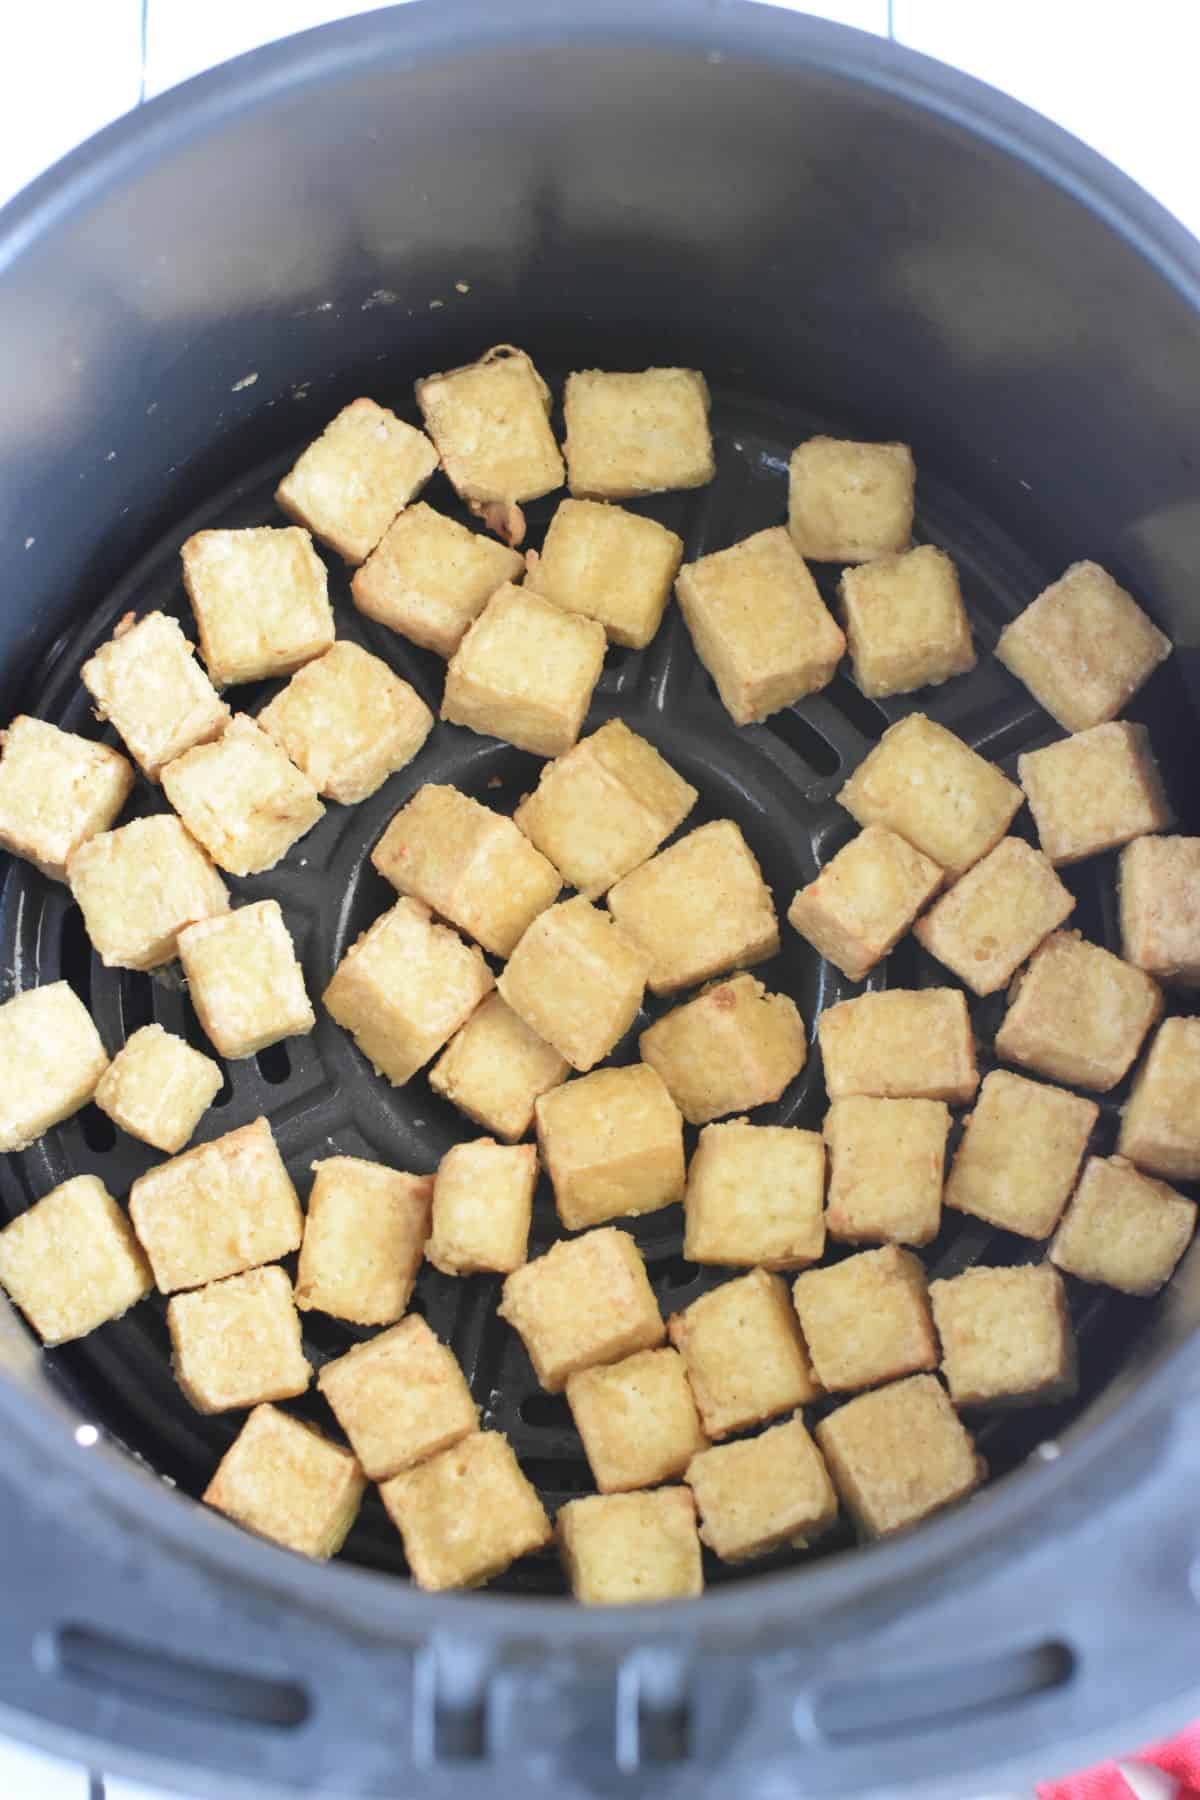 Cooked tofu cubes in an air fryer.